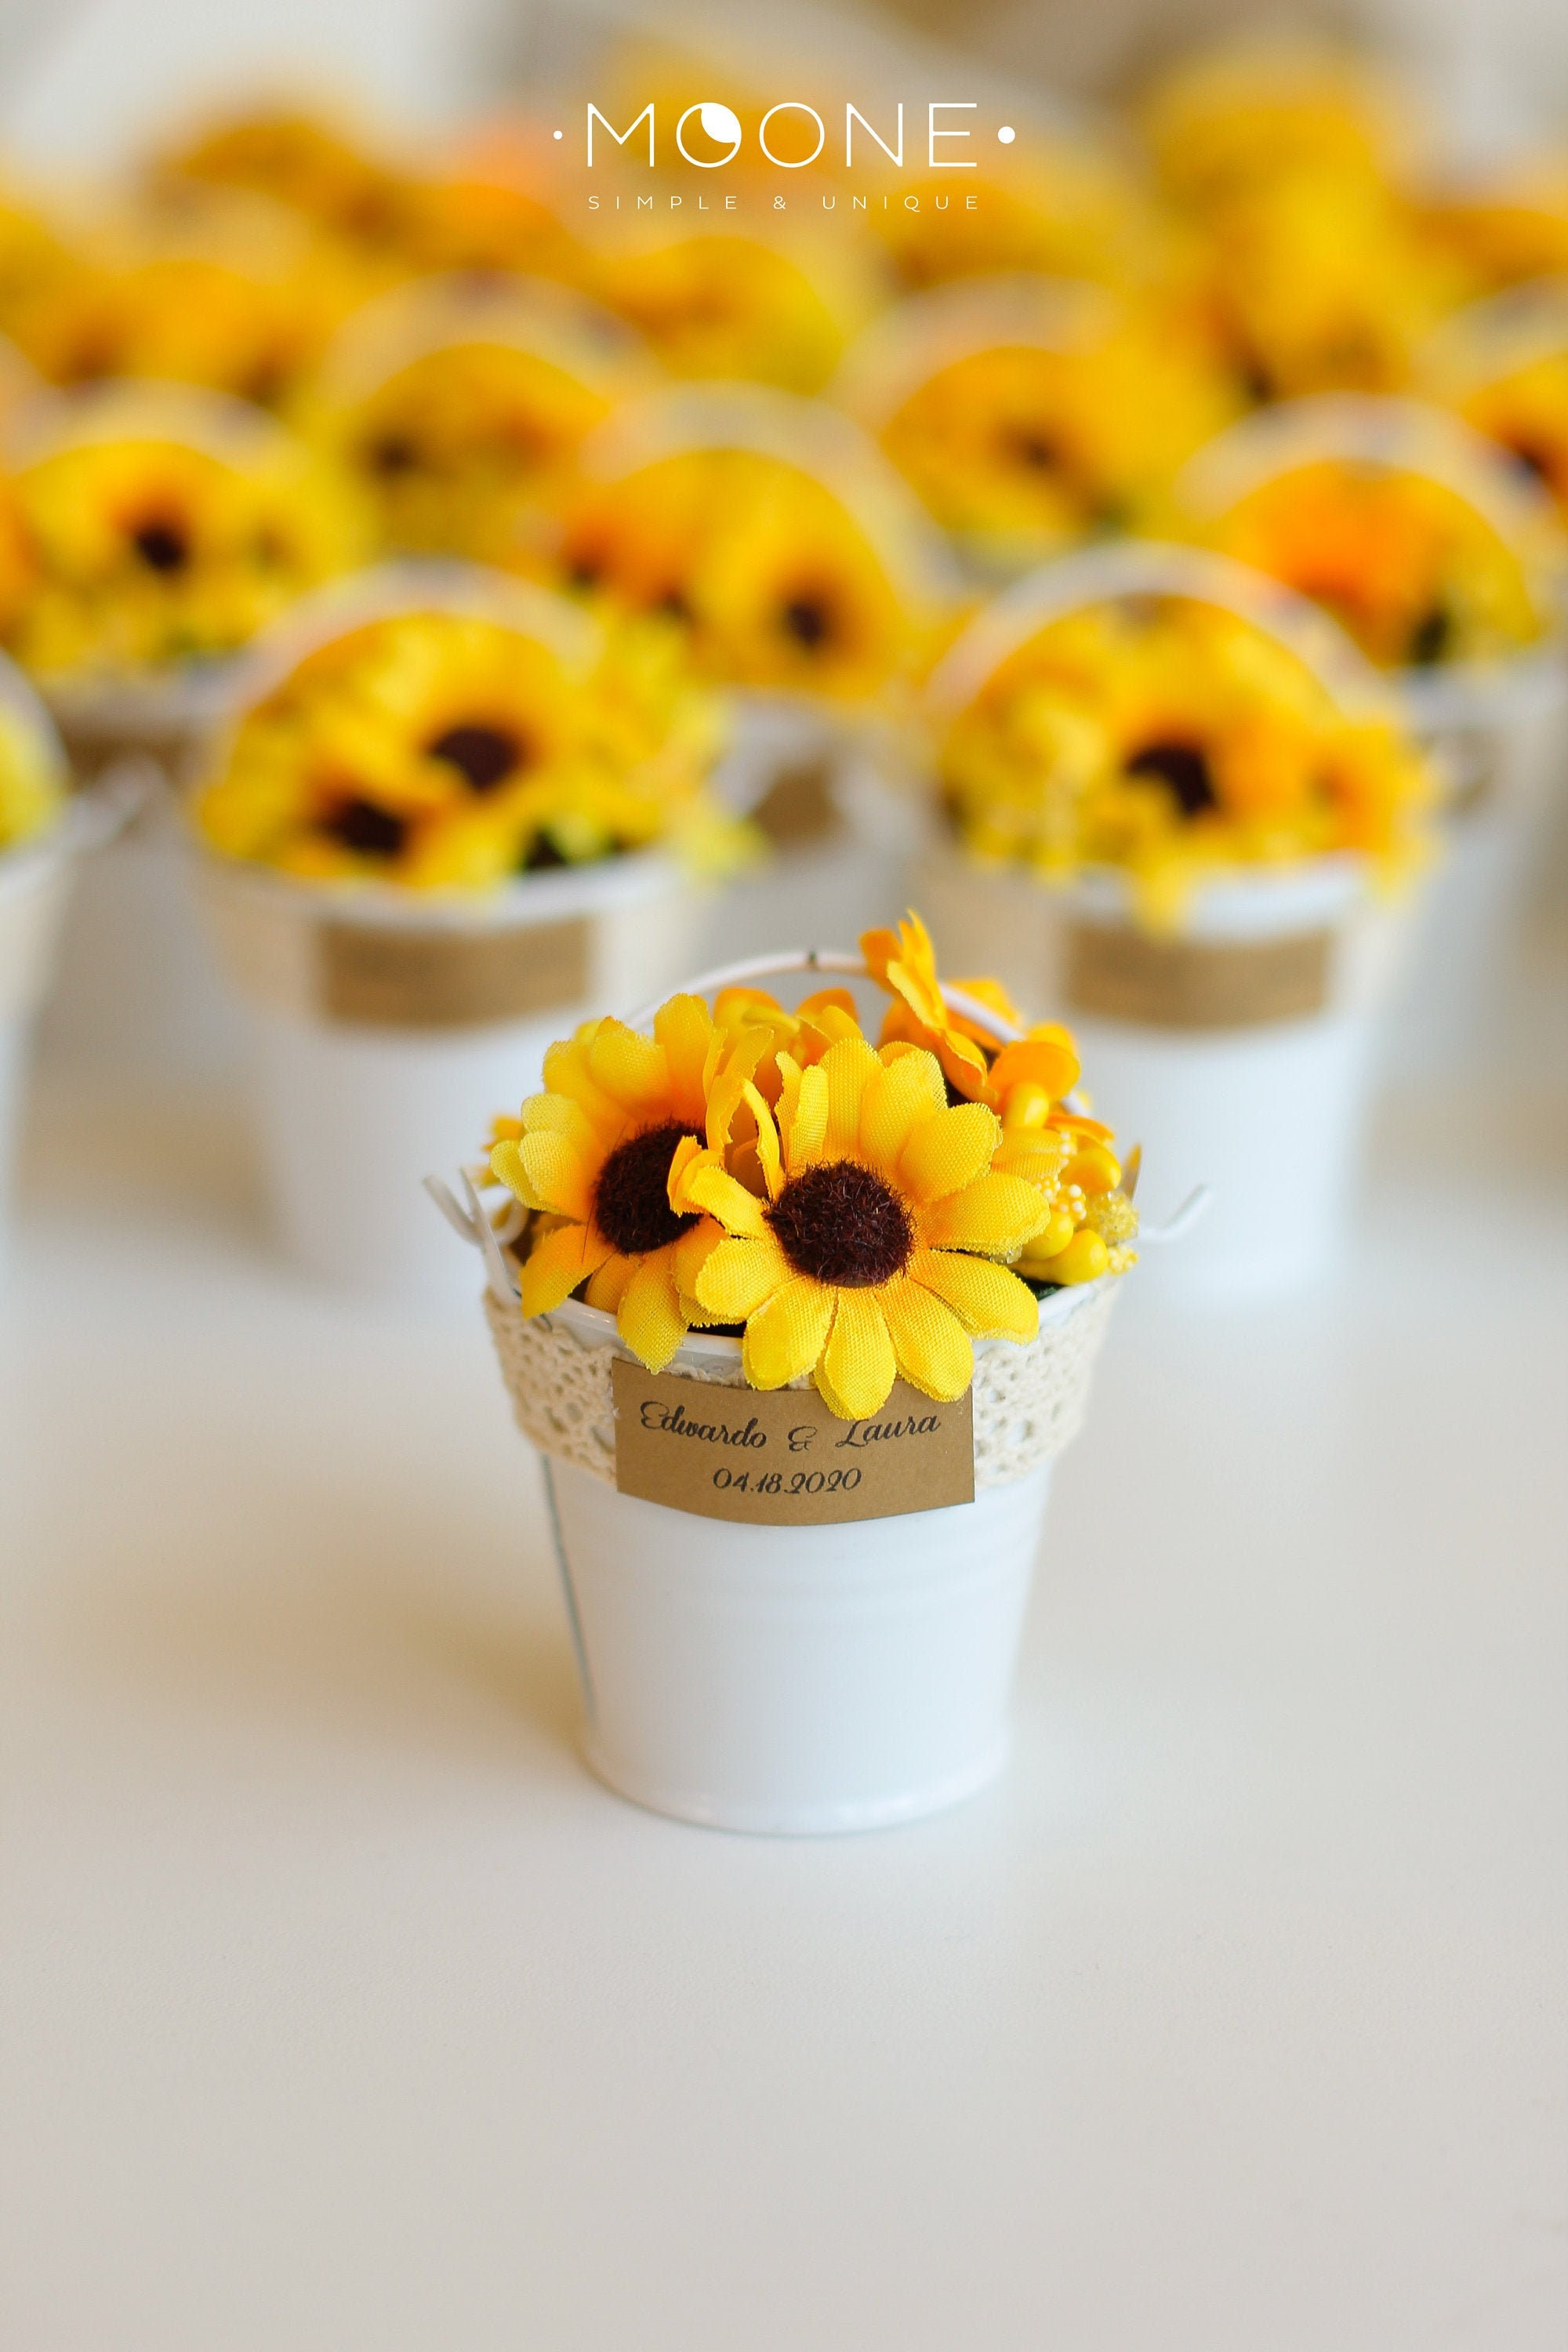 10Pcs Sunflower Wedding Favors For Guests, Party Favors, Decoration, Yellow Favor, Rustic